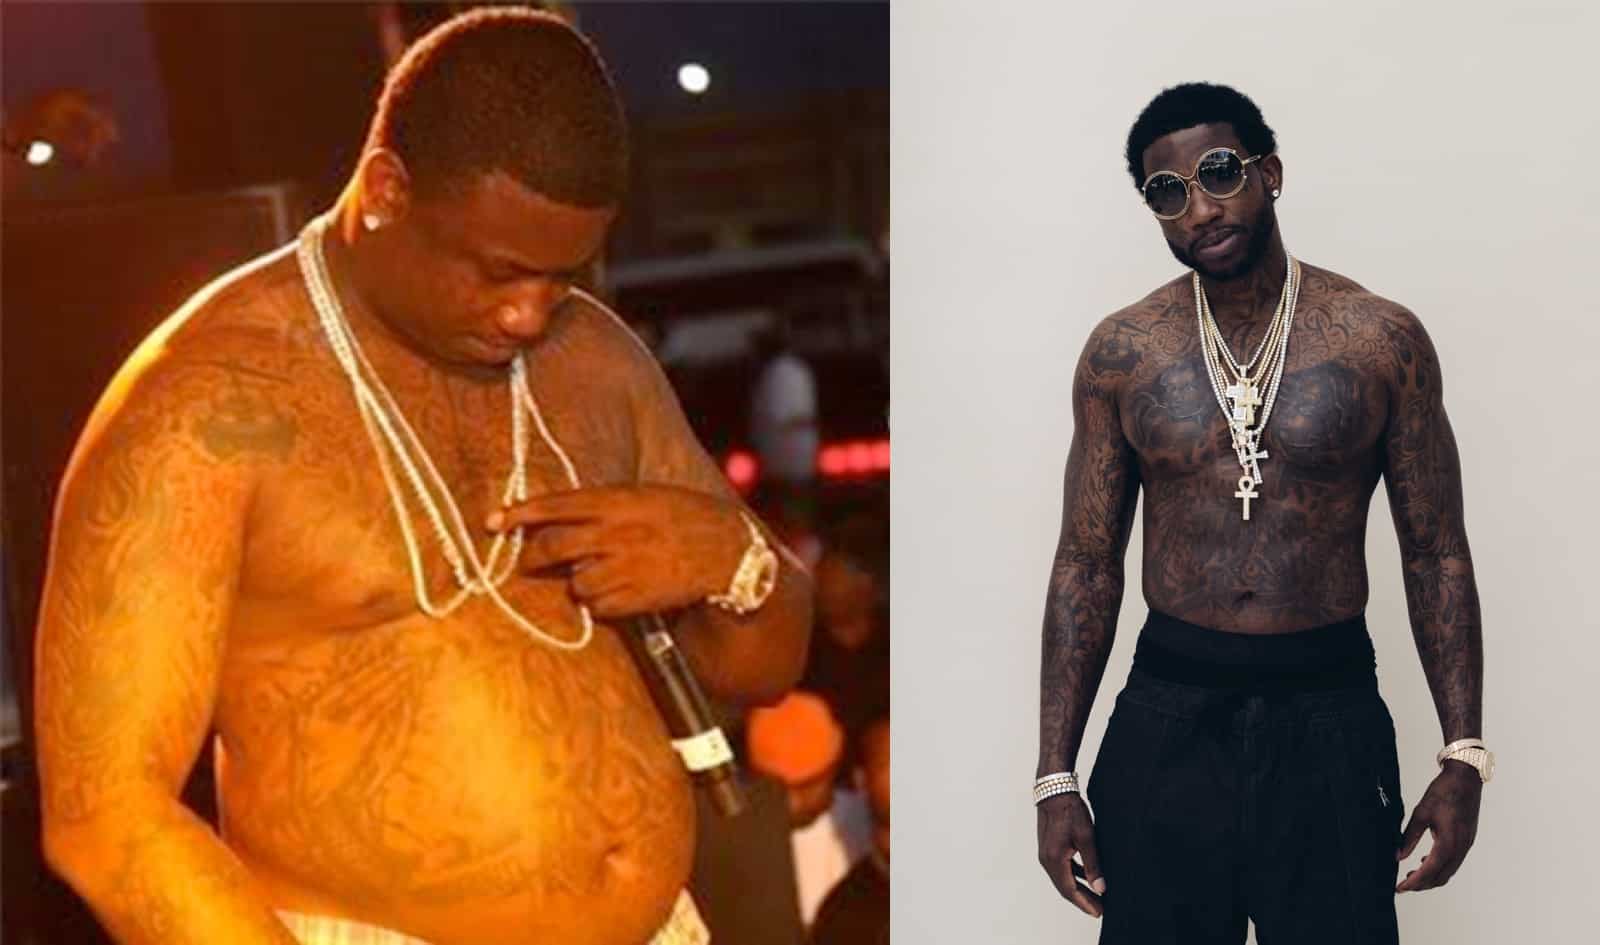 How Did Gucci Mane Lose Weight? Lost 50 Pounds in Prison